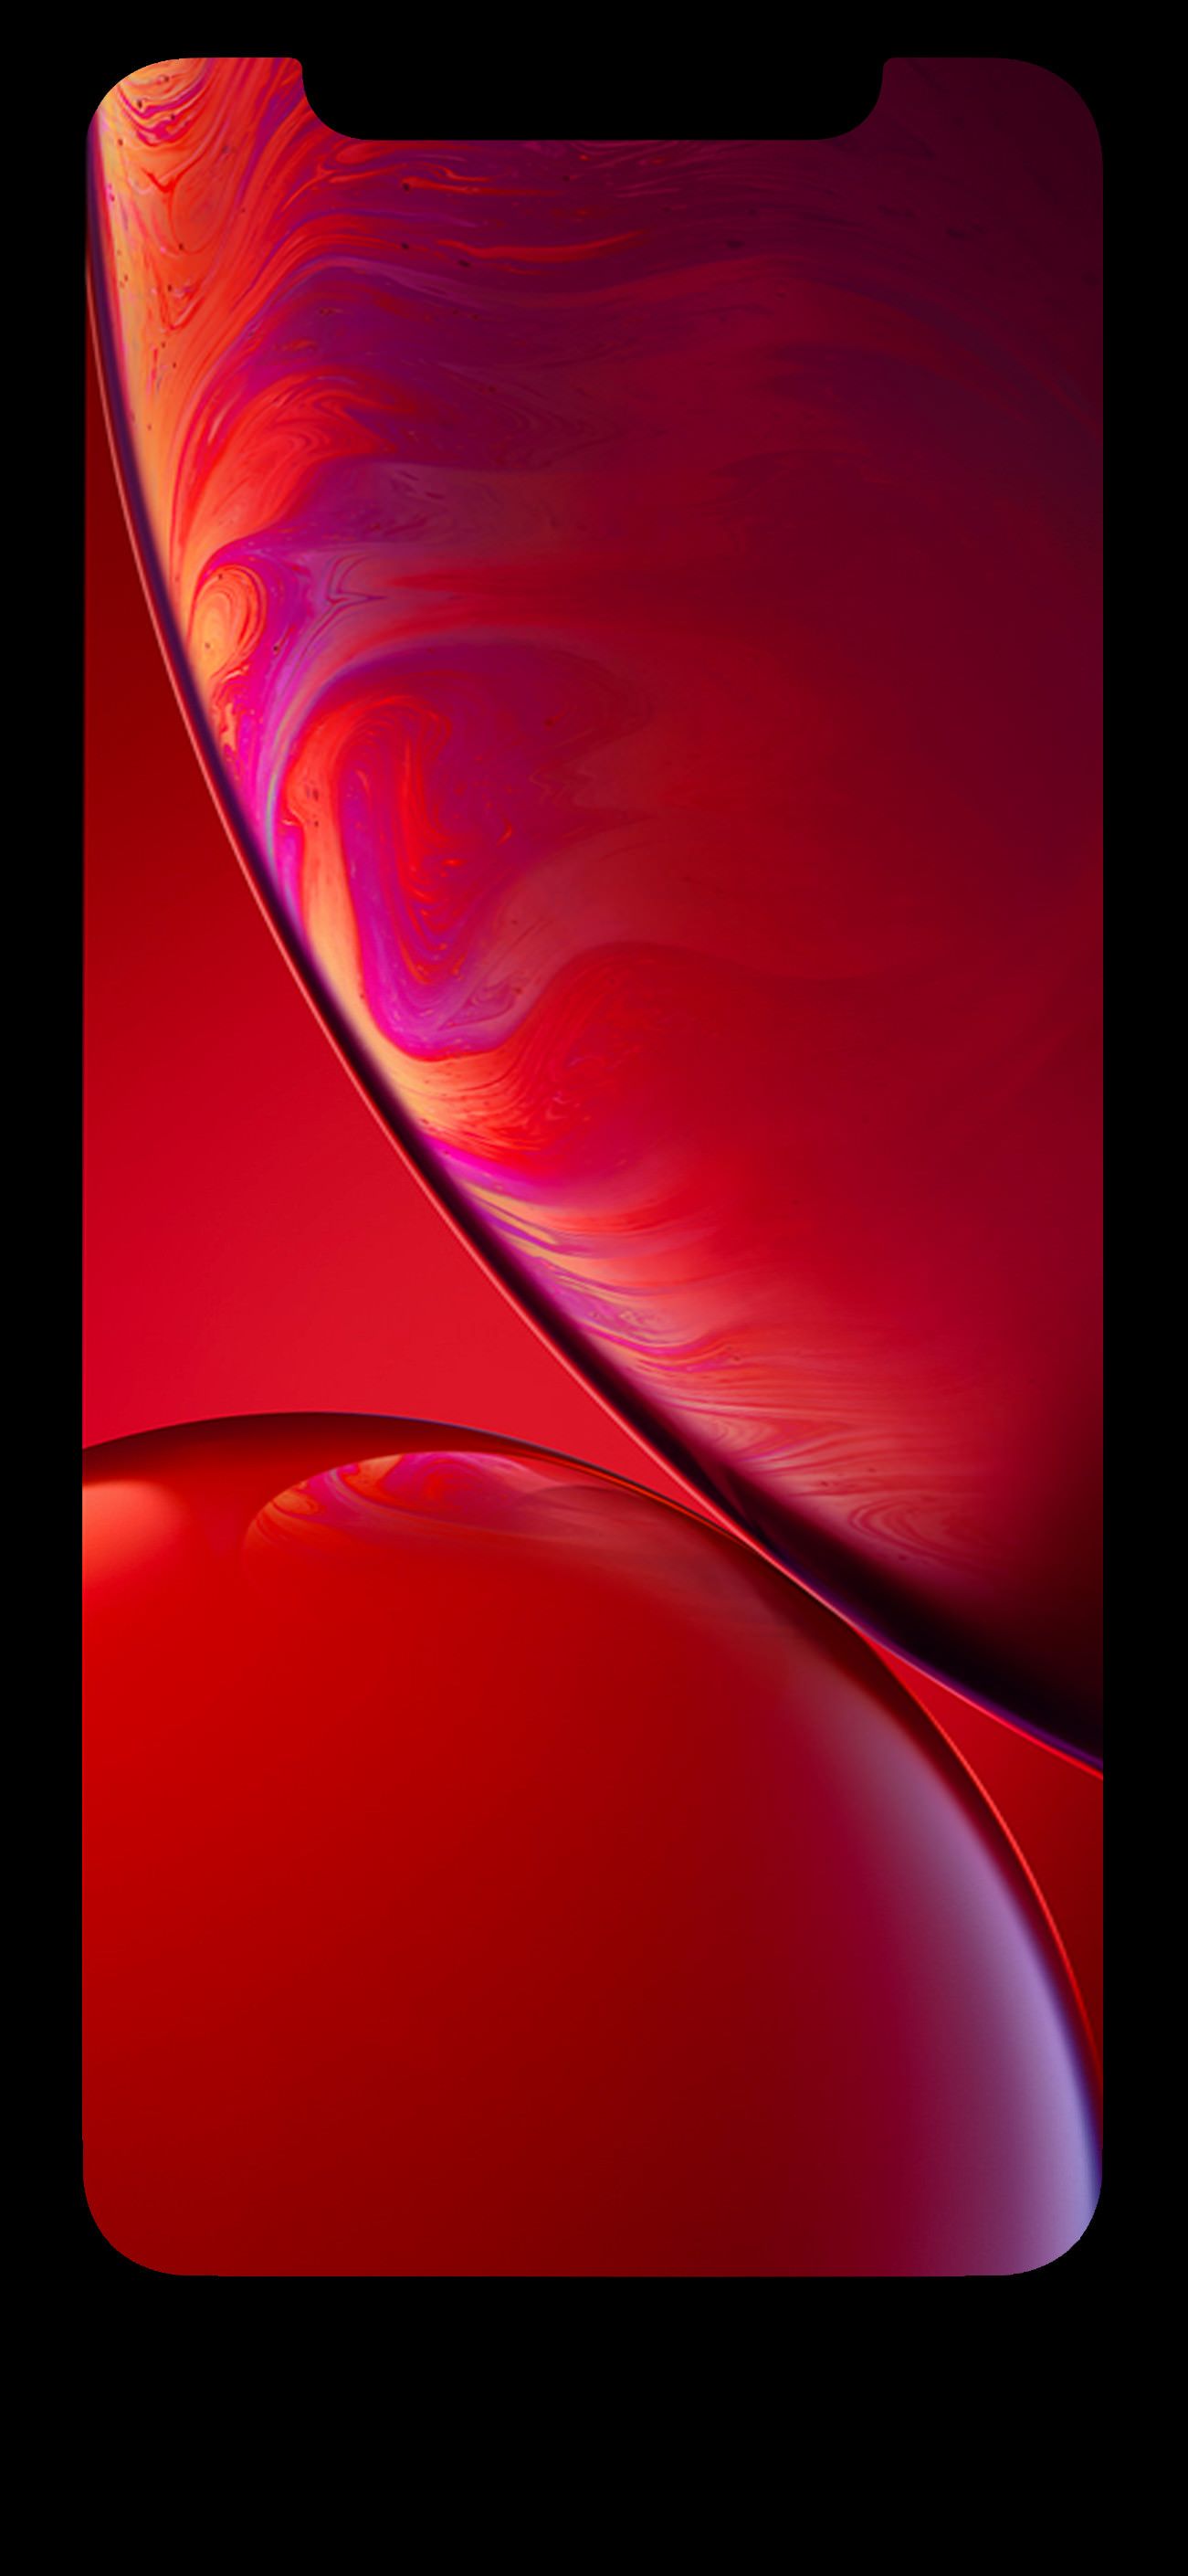 A couple of the iPhone Xr wallpaper. Credit to